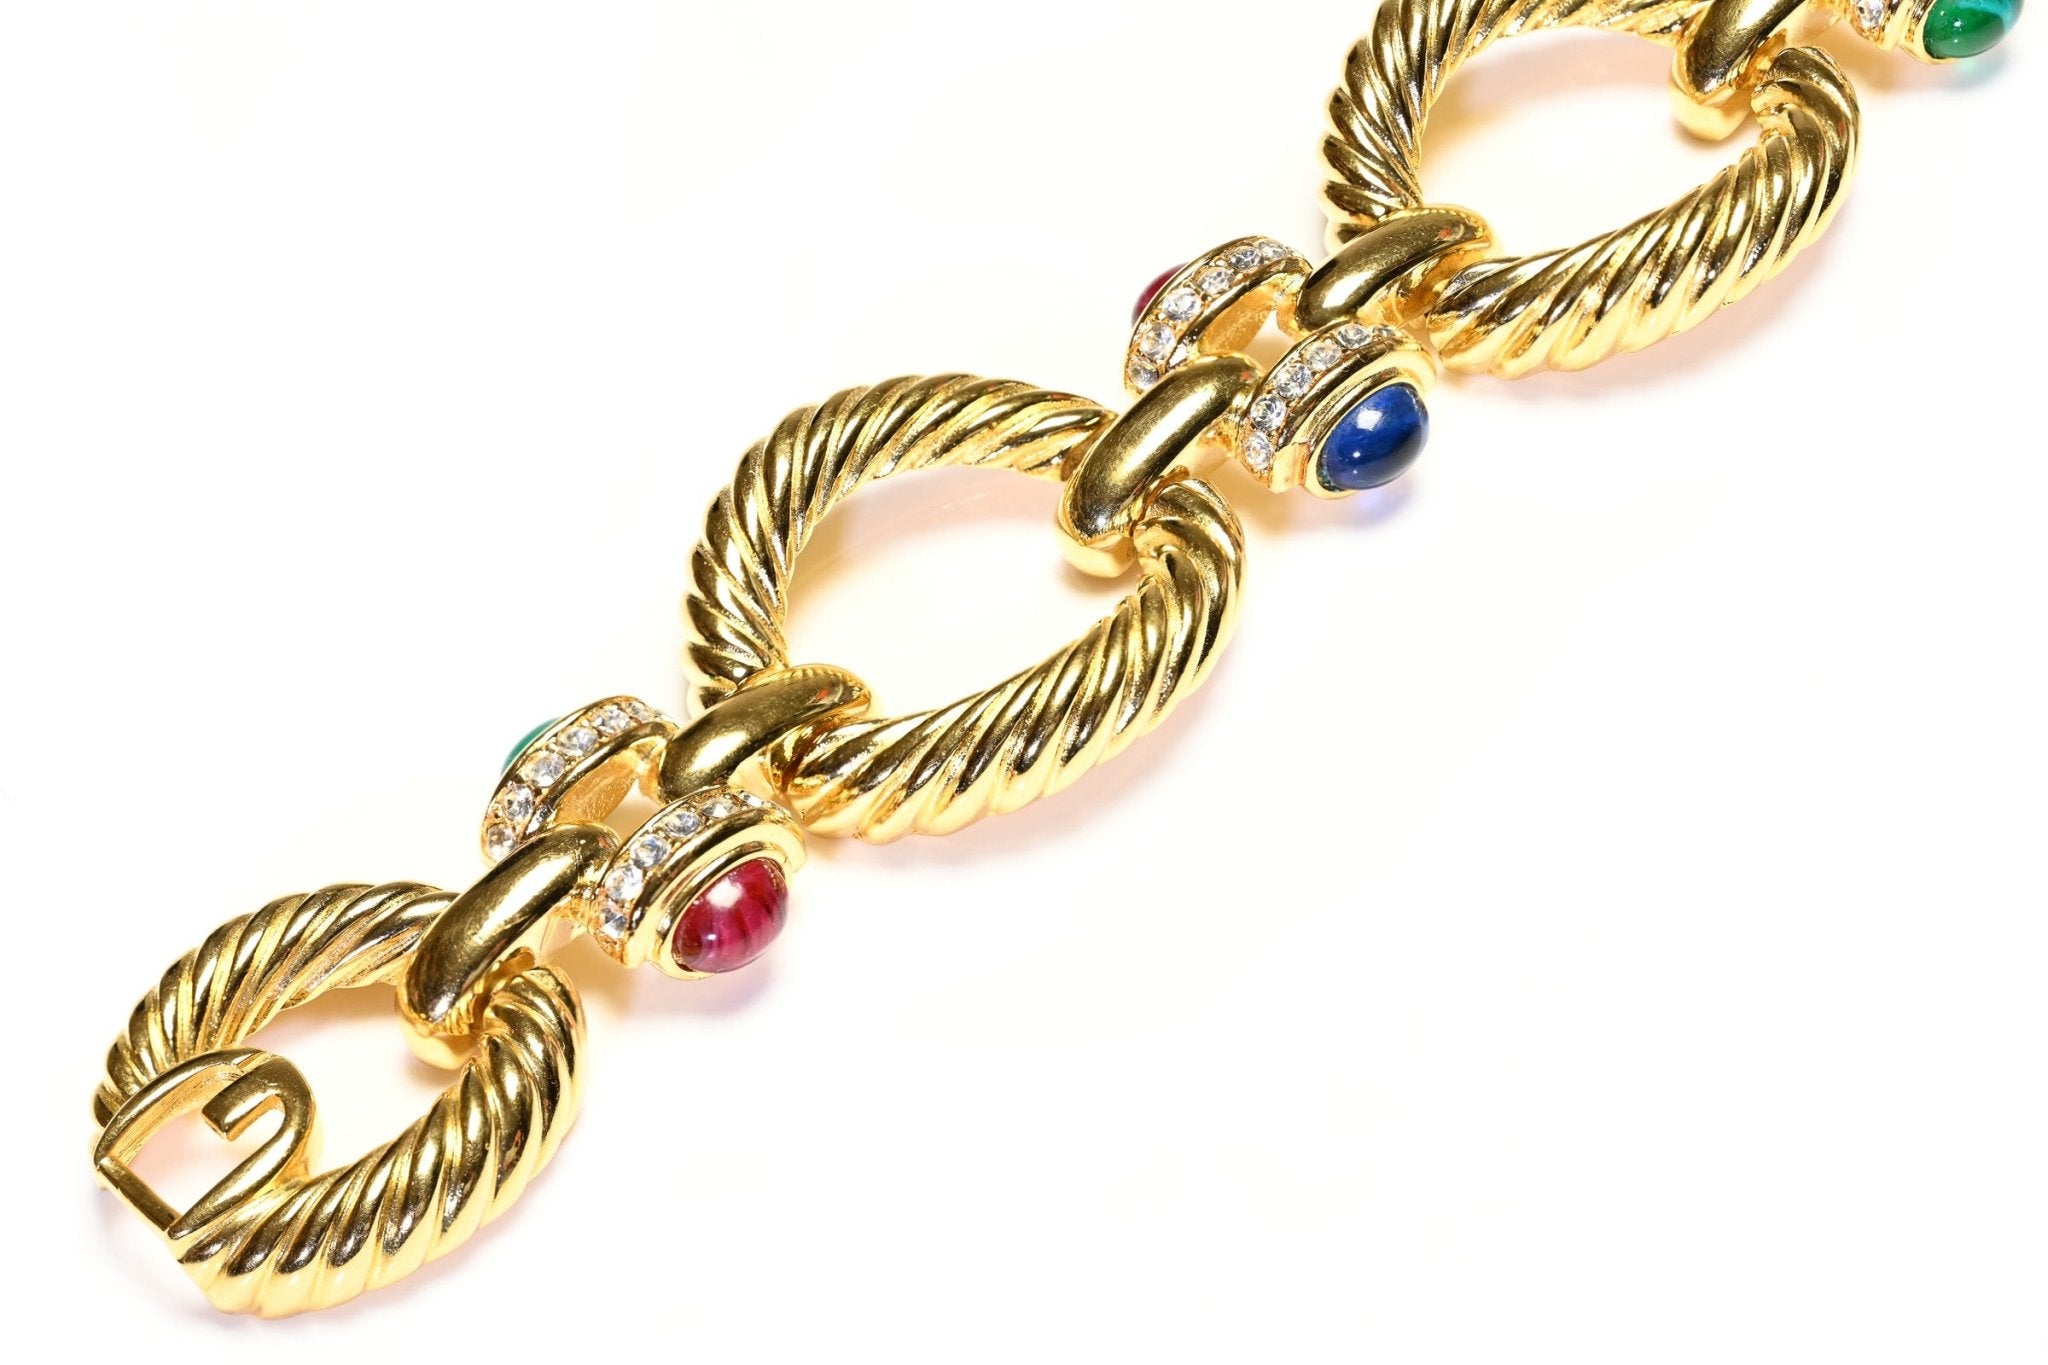 Vintage Givenchy Paris Chain Link Mughal Style Green Blue Red Cabochon Bracelet